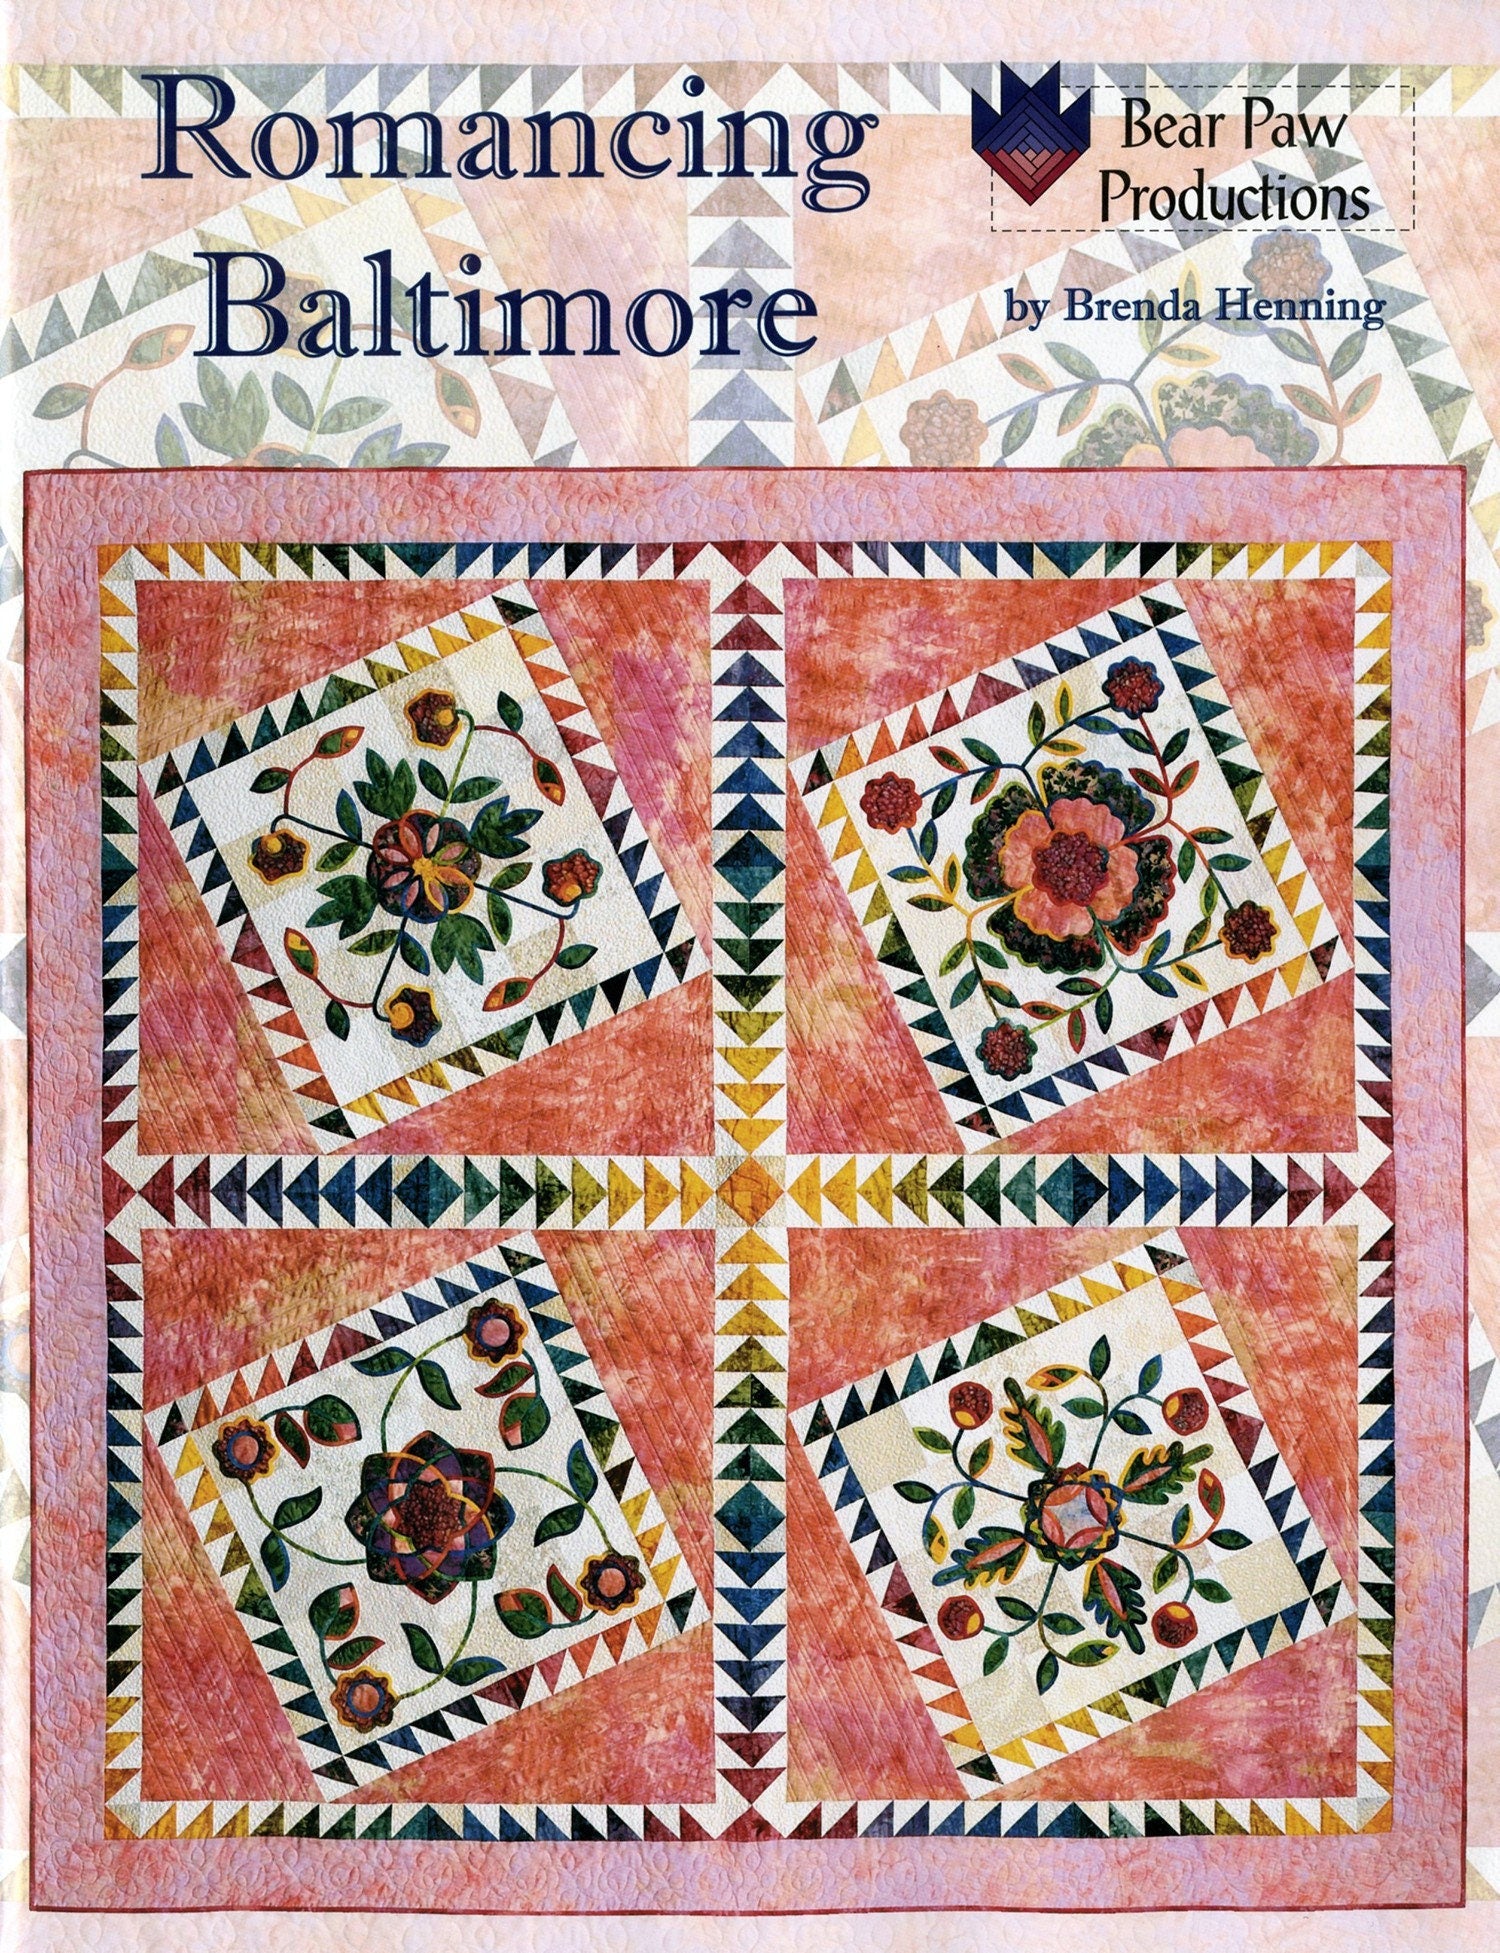 Romancing Baltimore by Brenda Henning of Bear Paw Productions